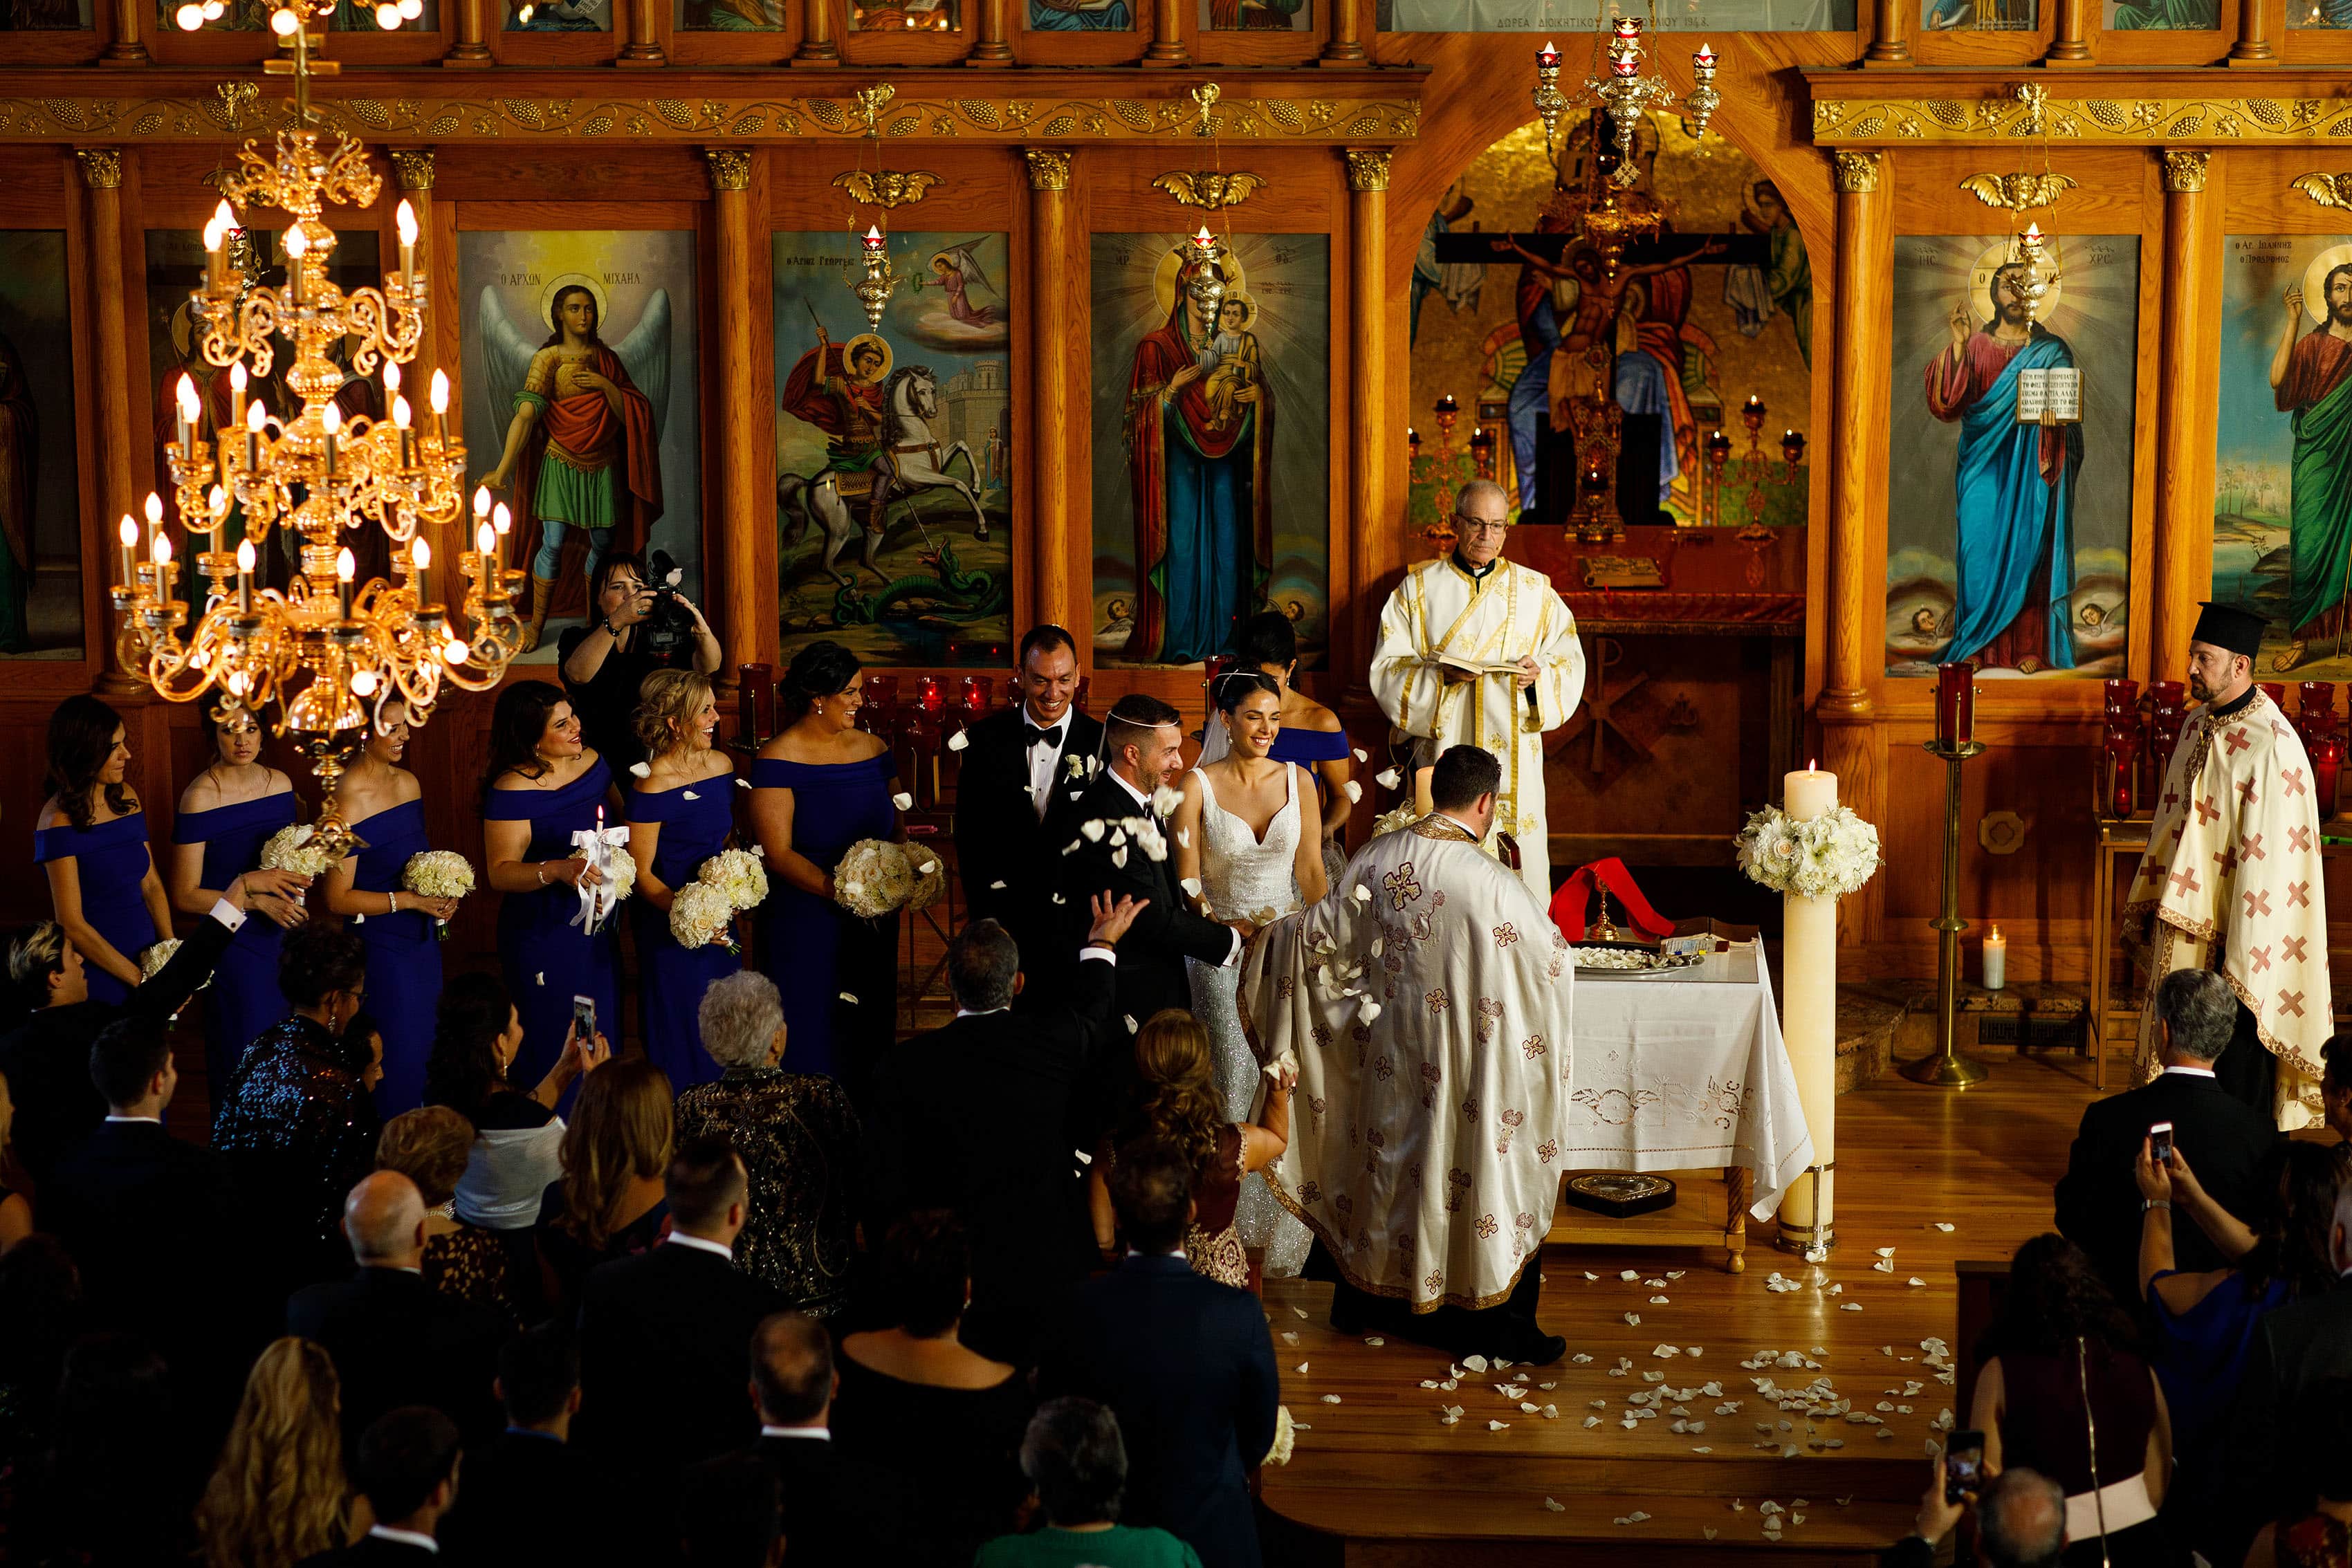 The bride and groom are showered with rose pedals as they participate in the ceremonial walk around the table during their Albuquerque Greek Orthodox wedding at Saint George